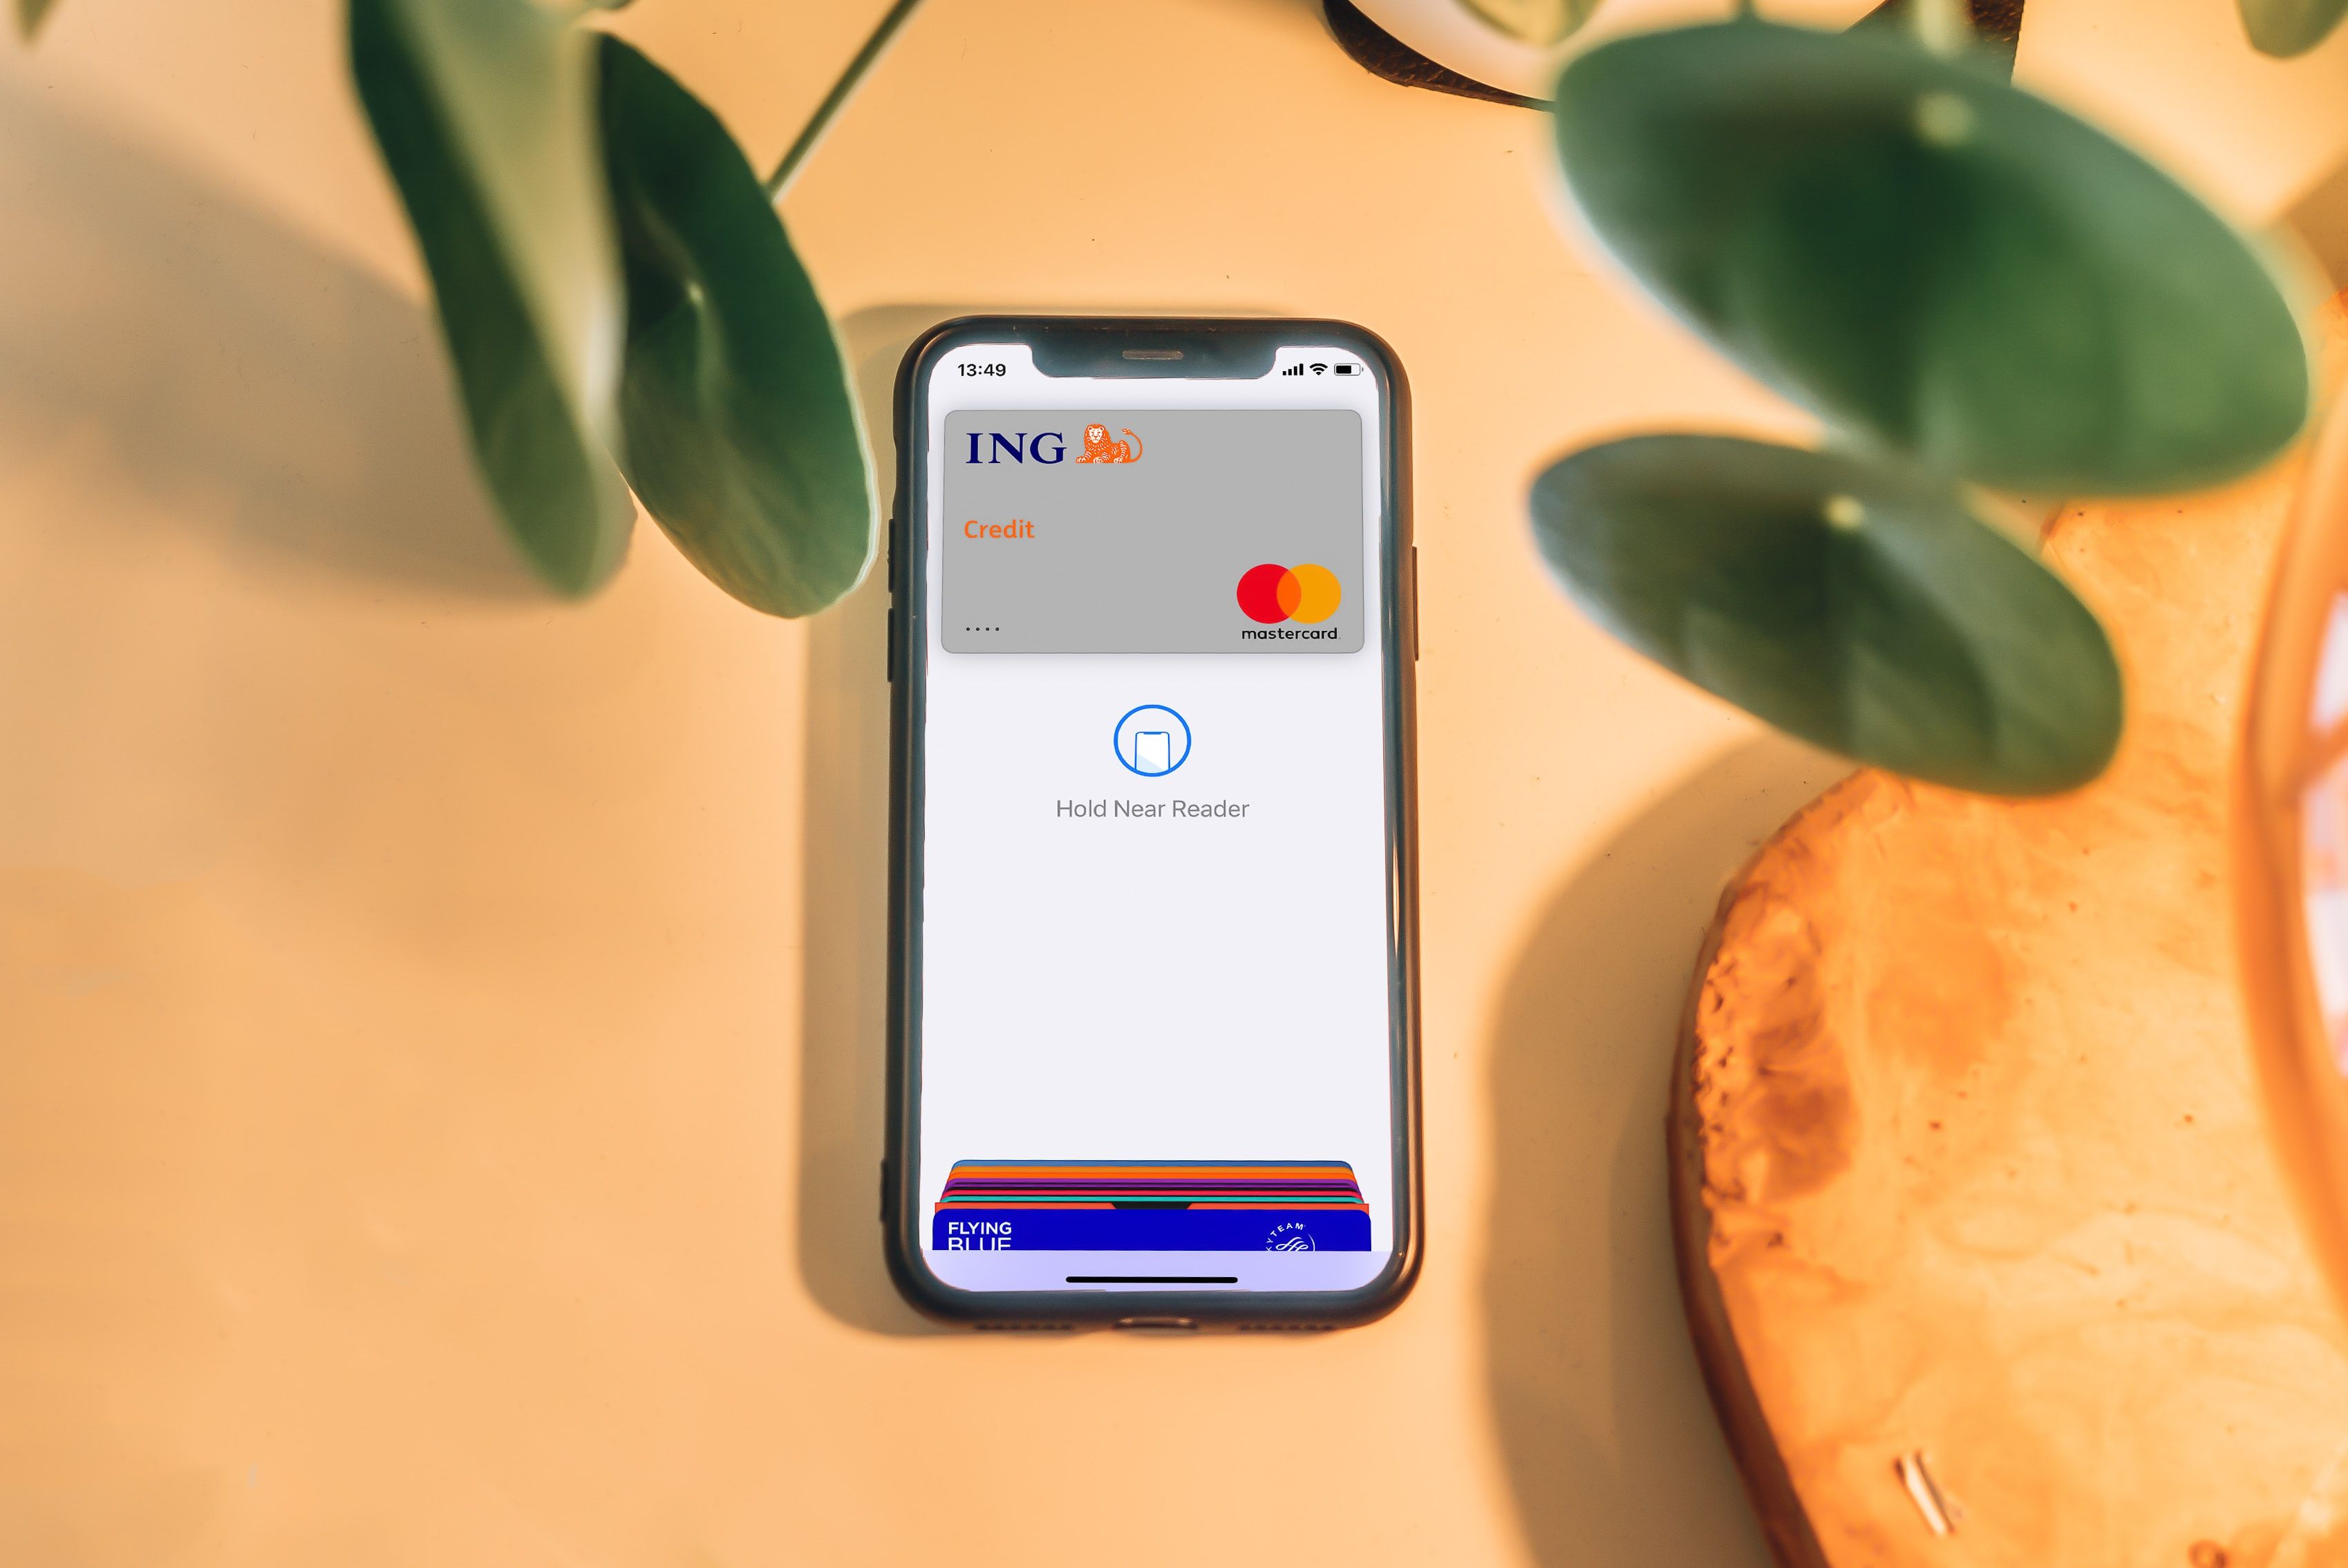 Apple's Wallet App with an ING card displayed